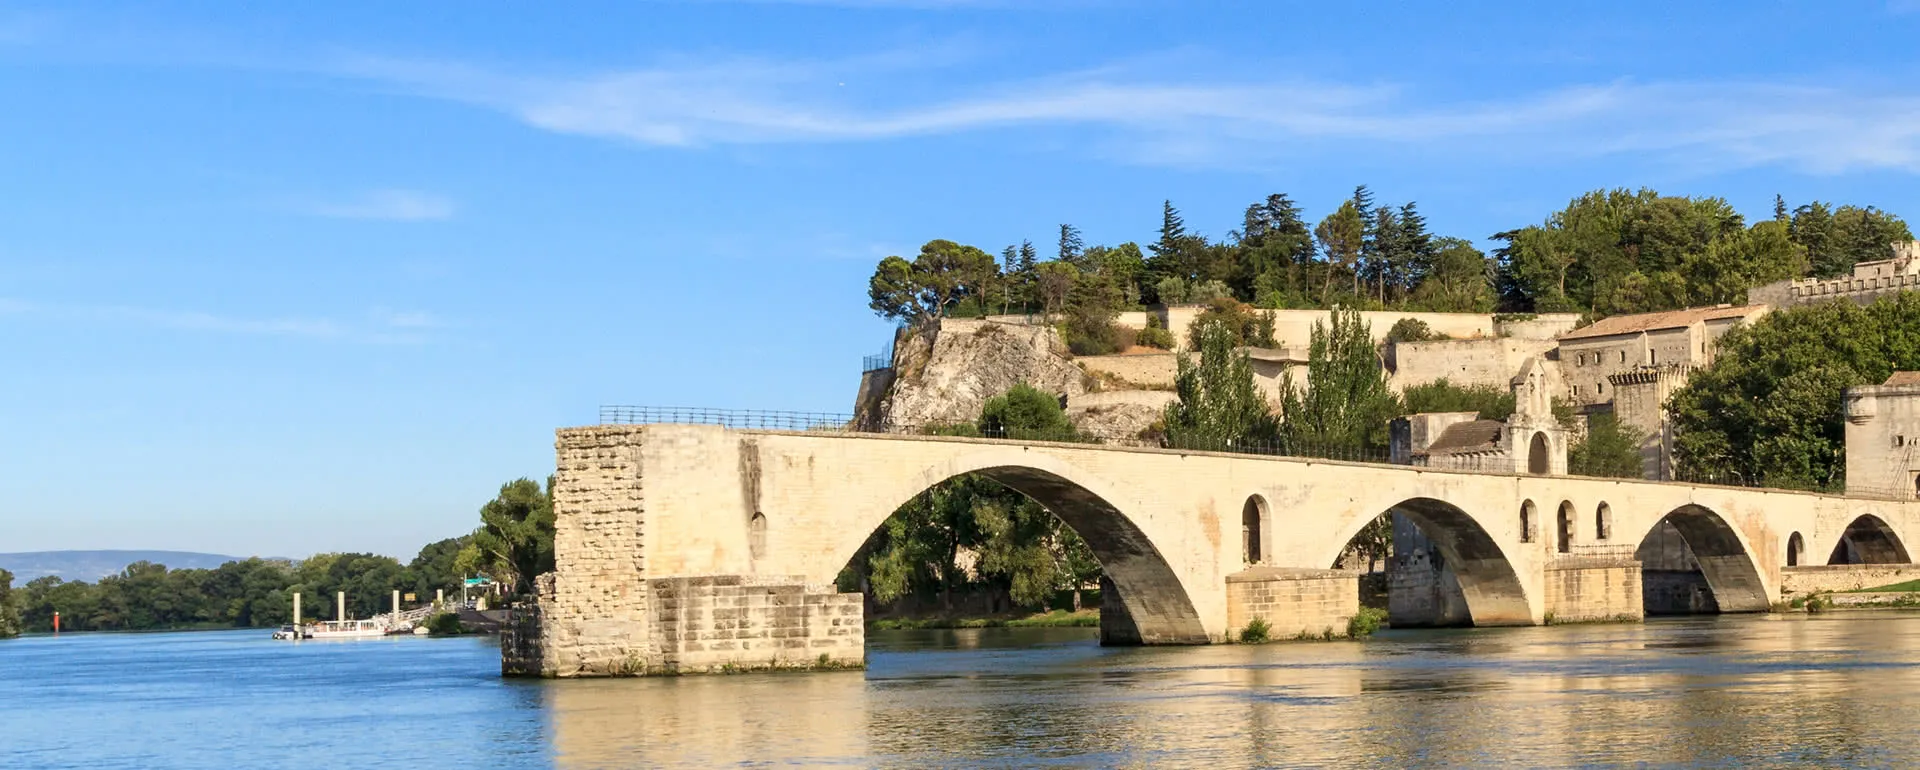 Avignon - the destination with youth hostels